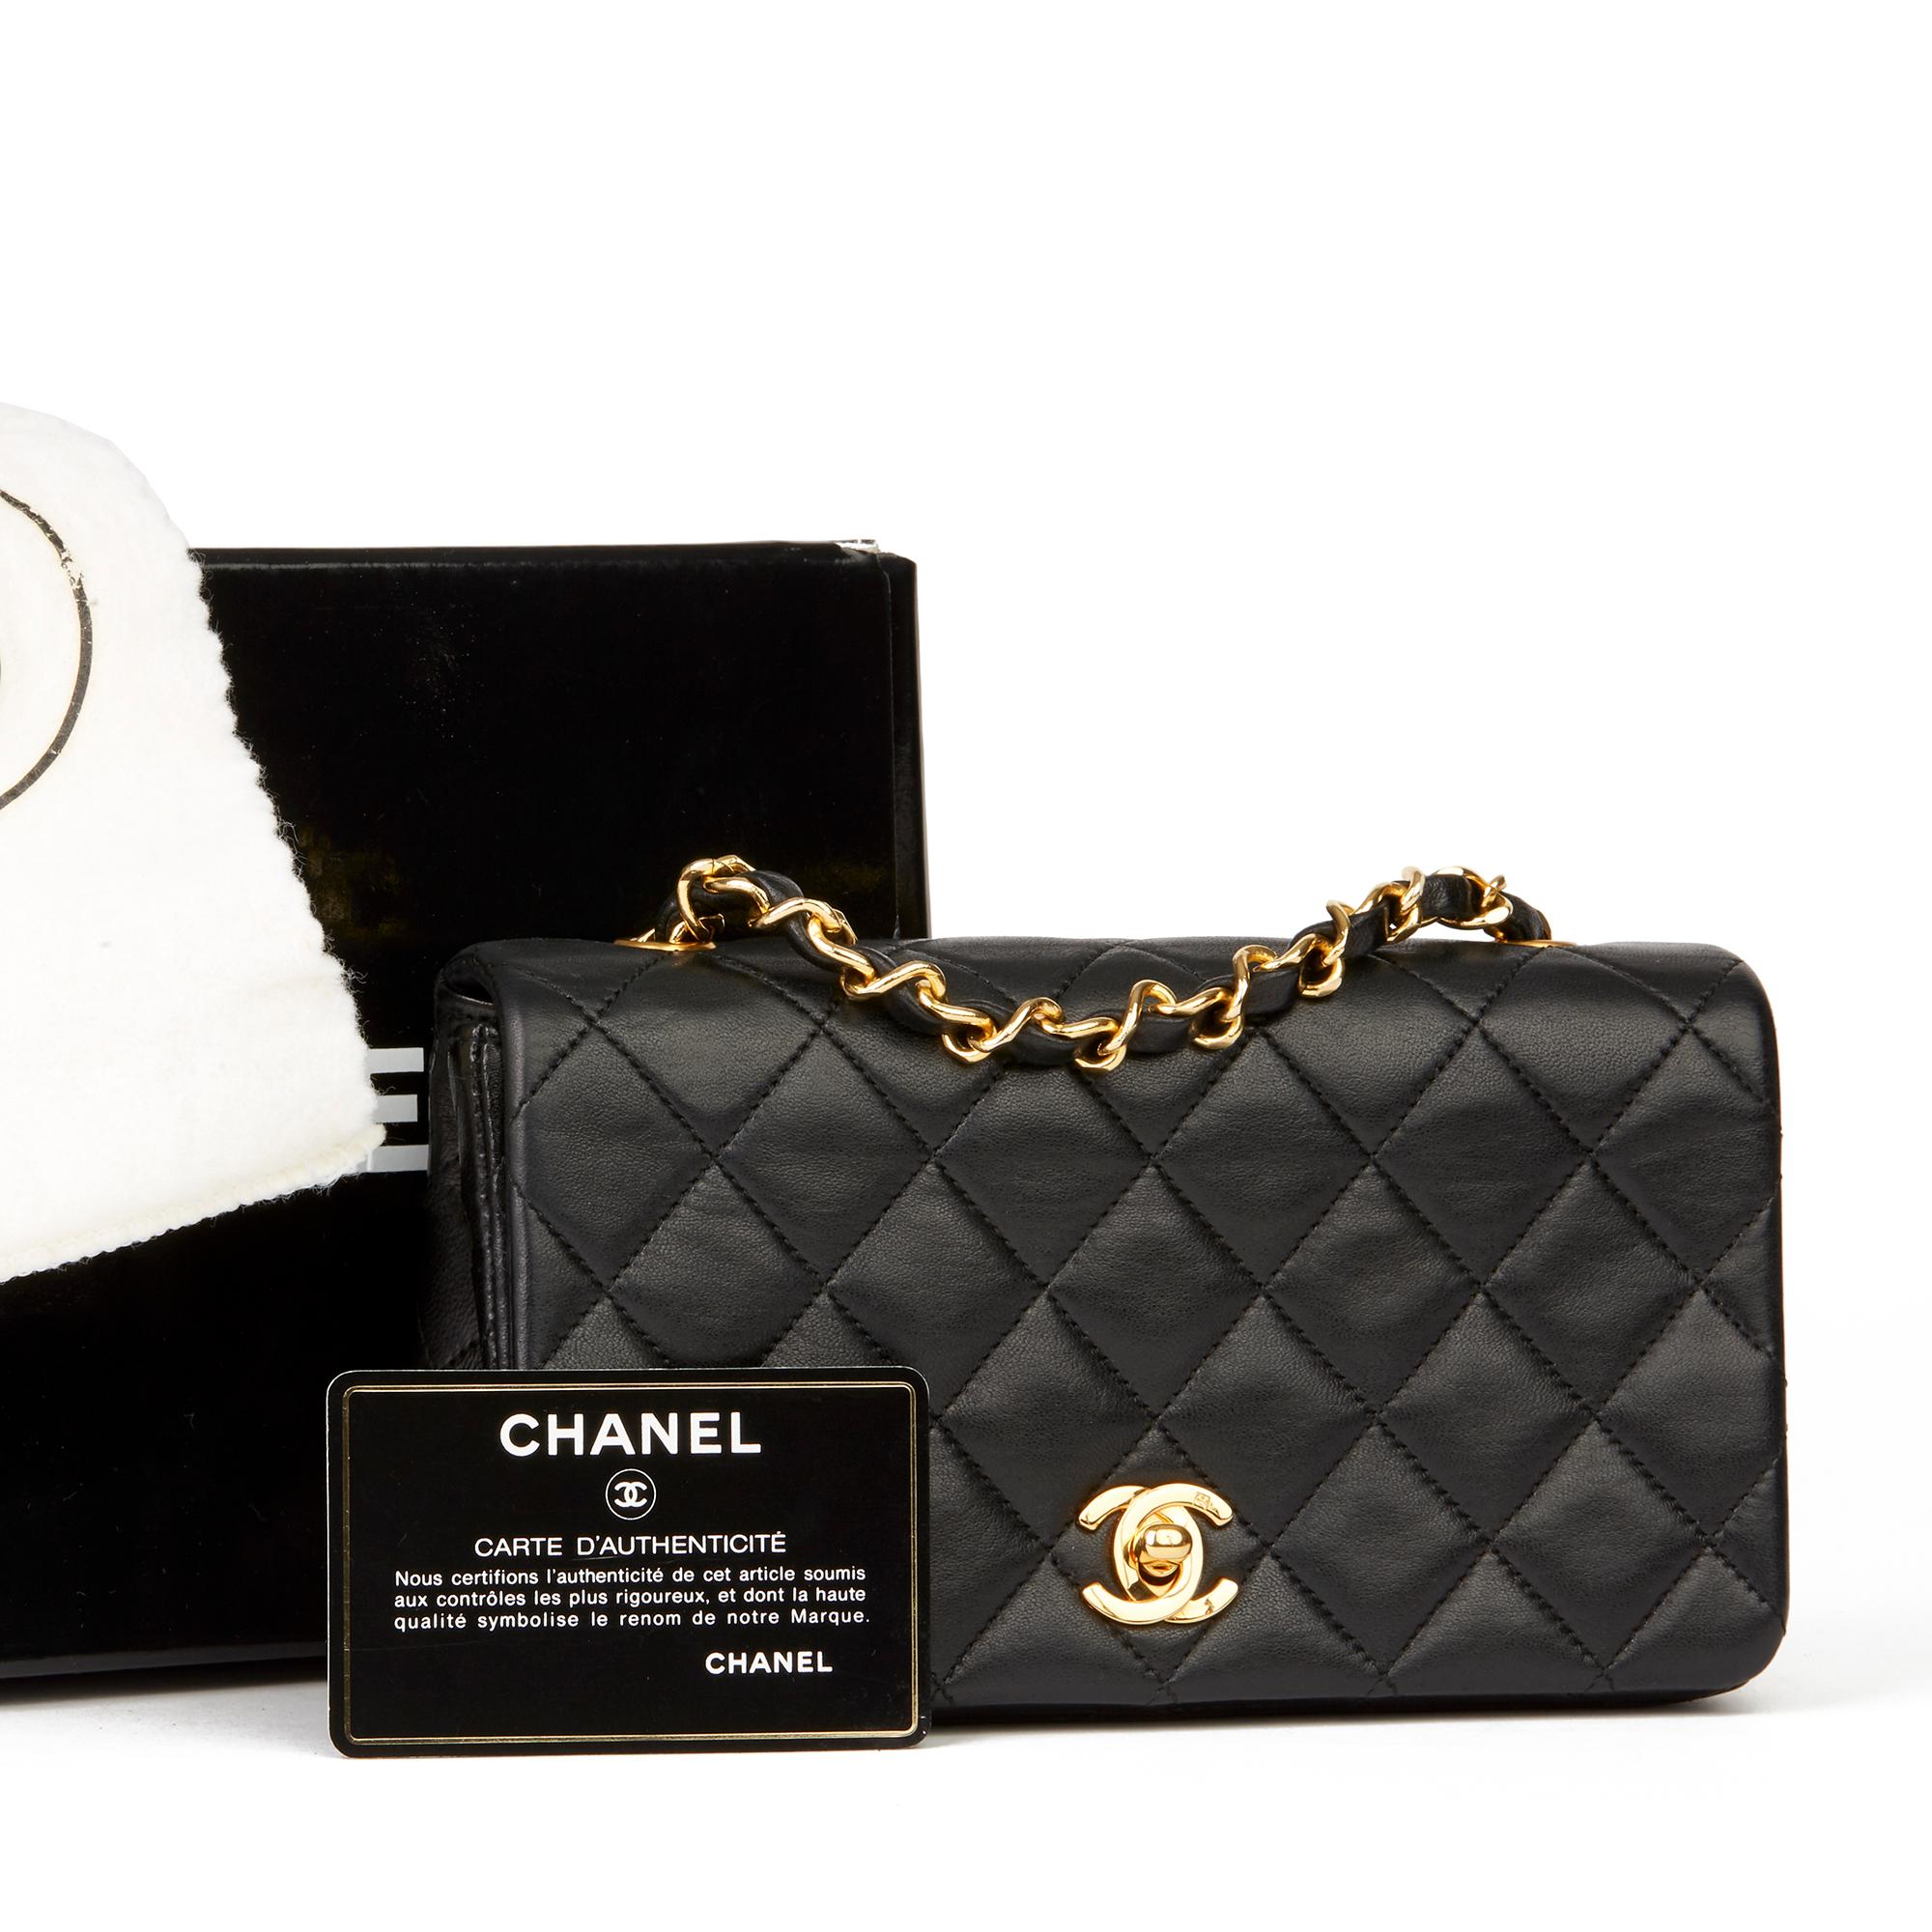 1991 Chanel Black Quilted Lambskin Vintage Mini Flap Bag 7